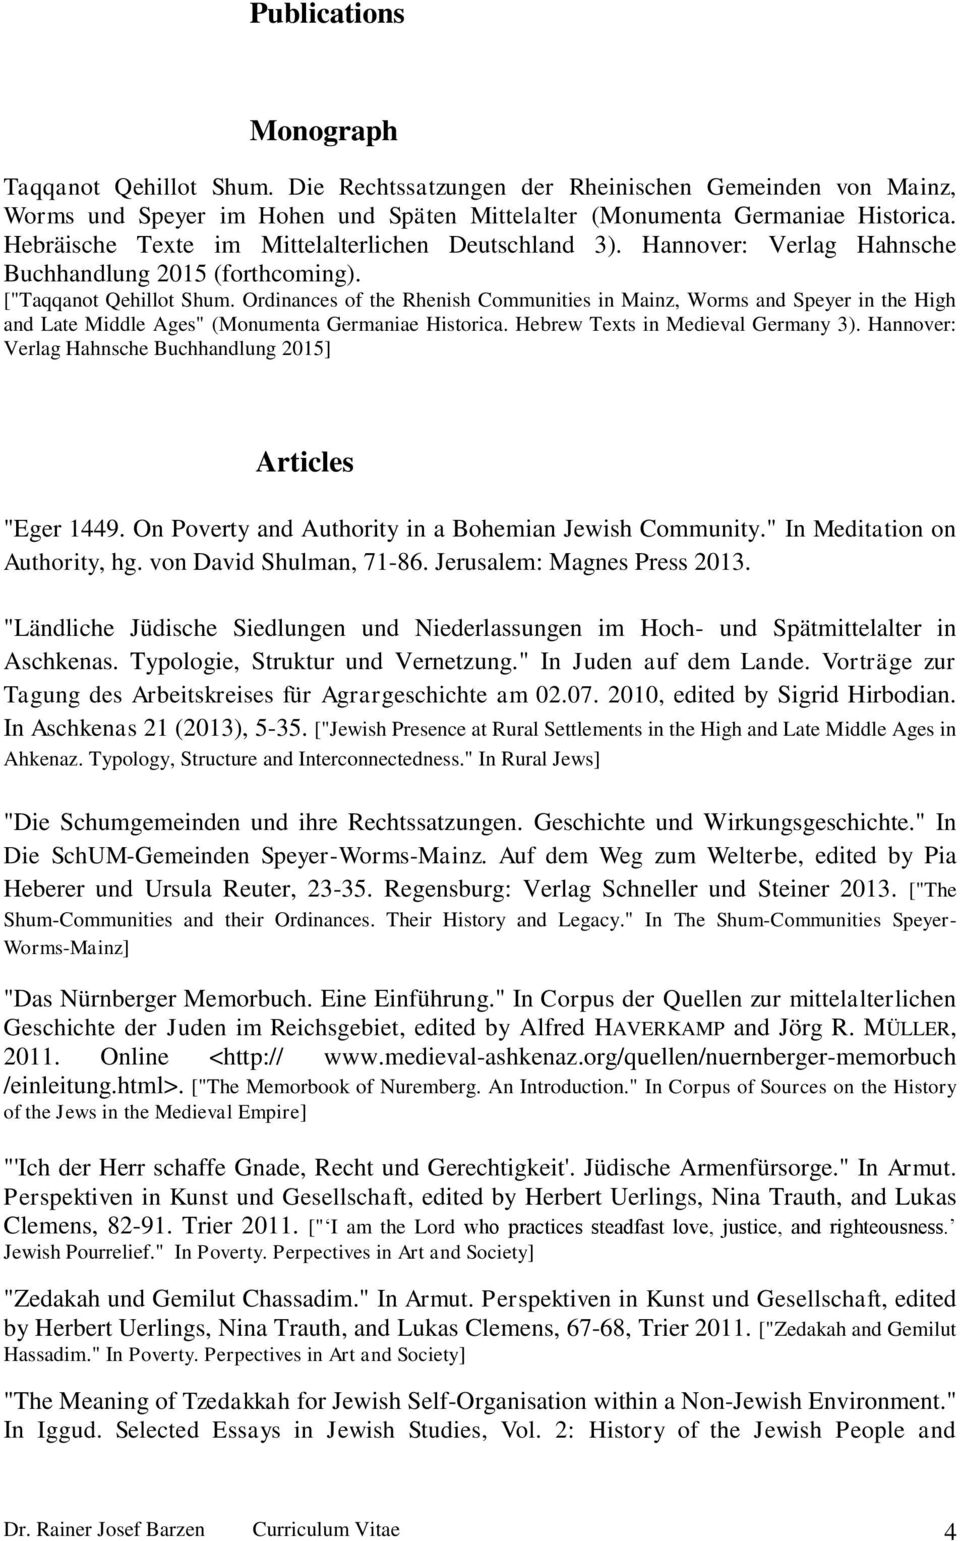 Ordinances of the Rhenish Communities in Mainz, Worms and Speyer in the High and Late Middle Ages" (Monumenta Germaniae Historica. Hebrew Texts in Medieval Germany 3).